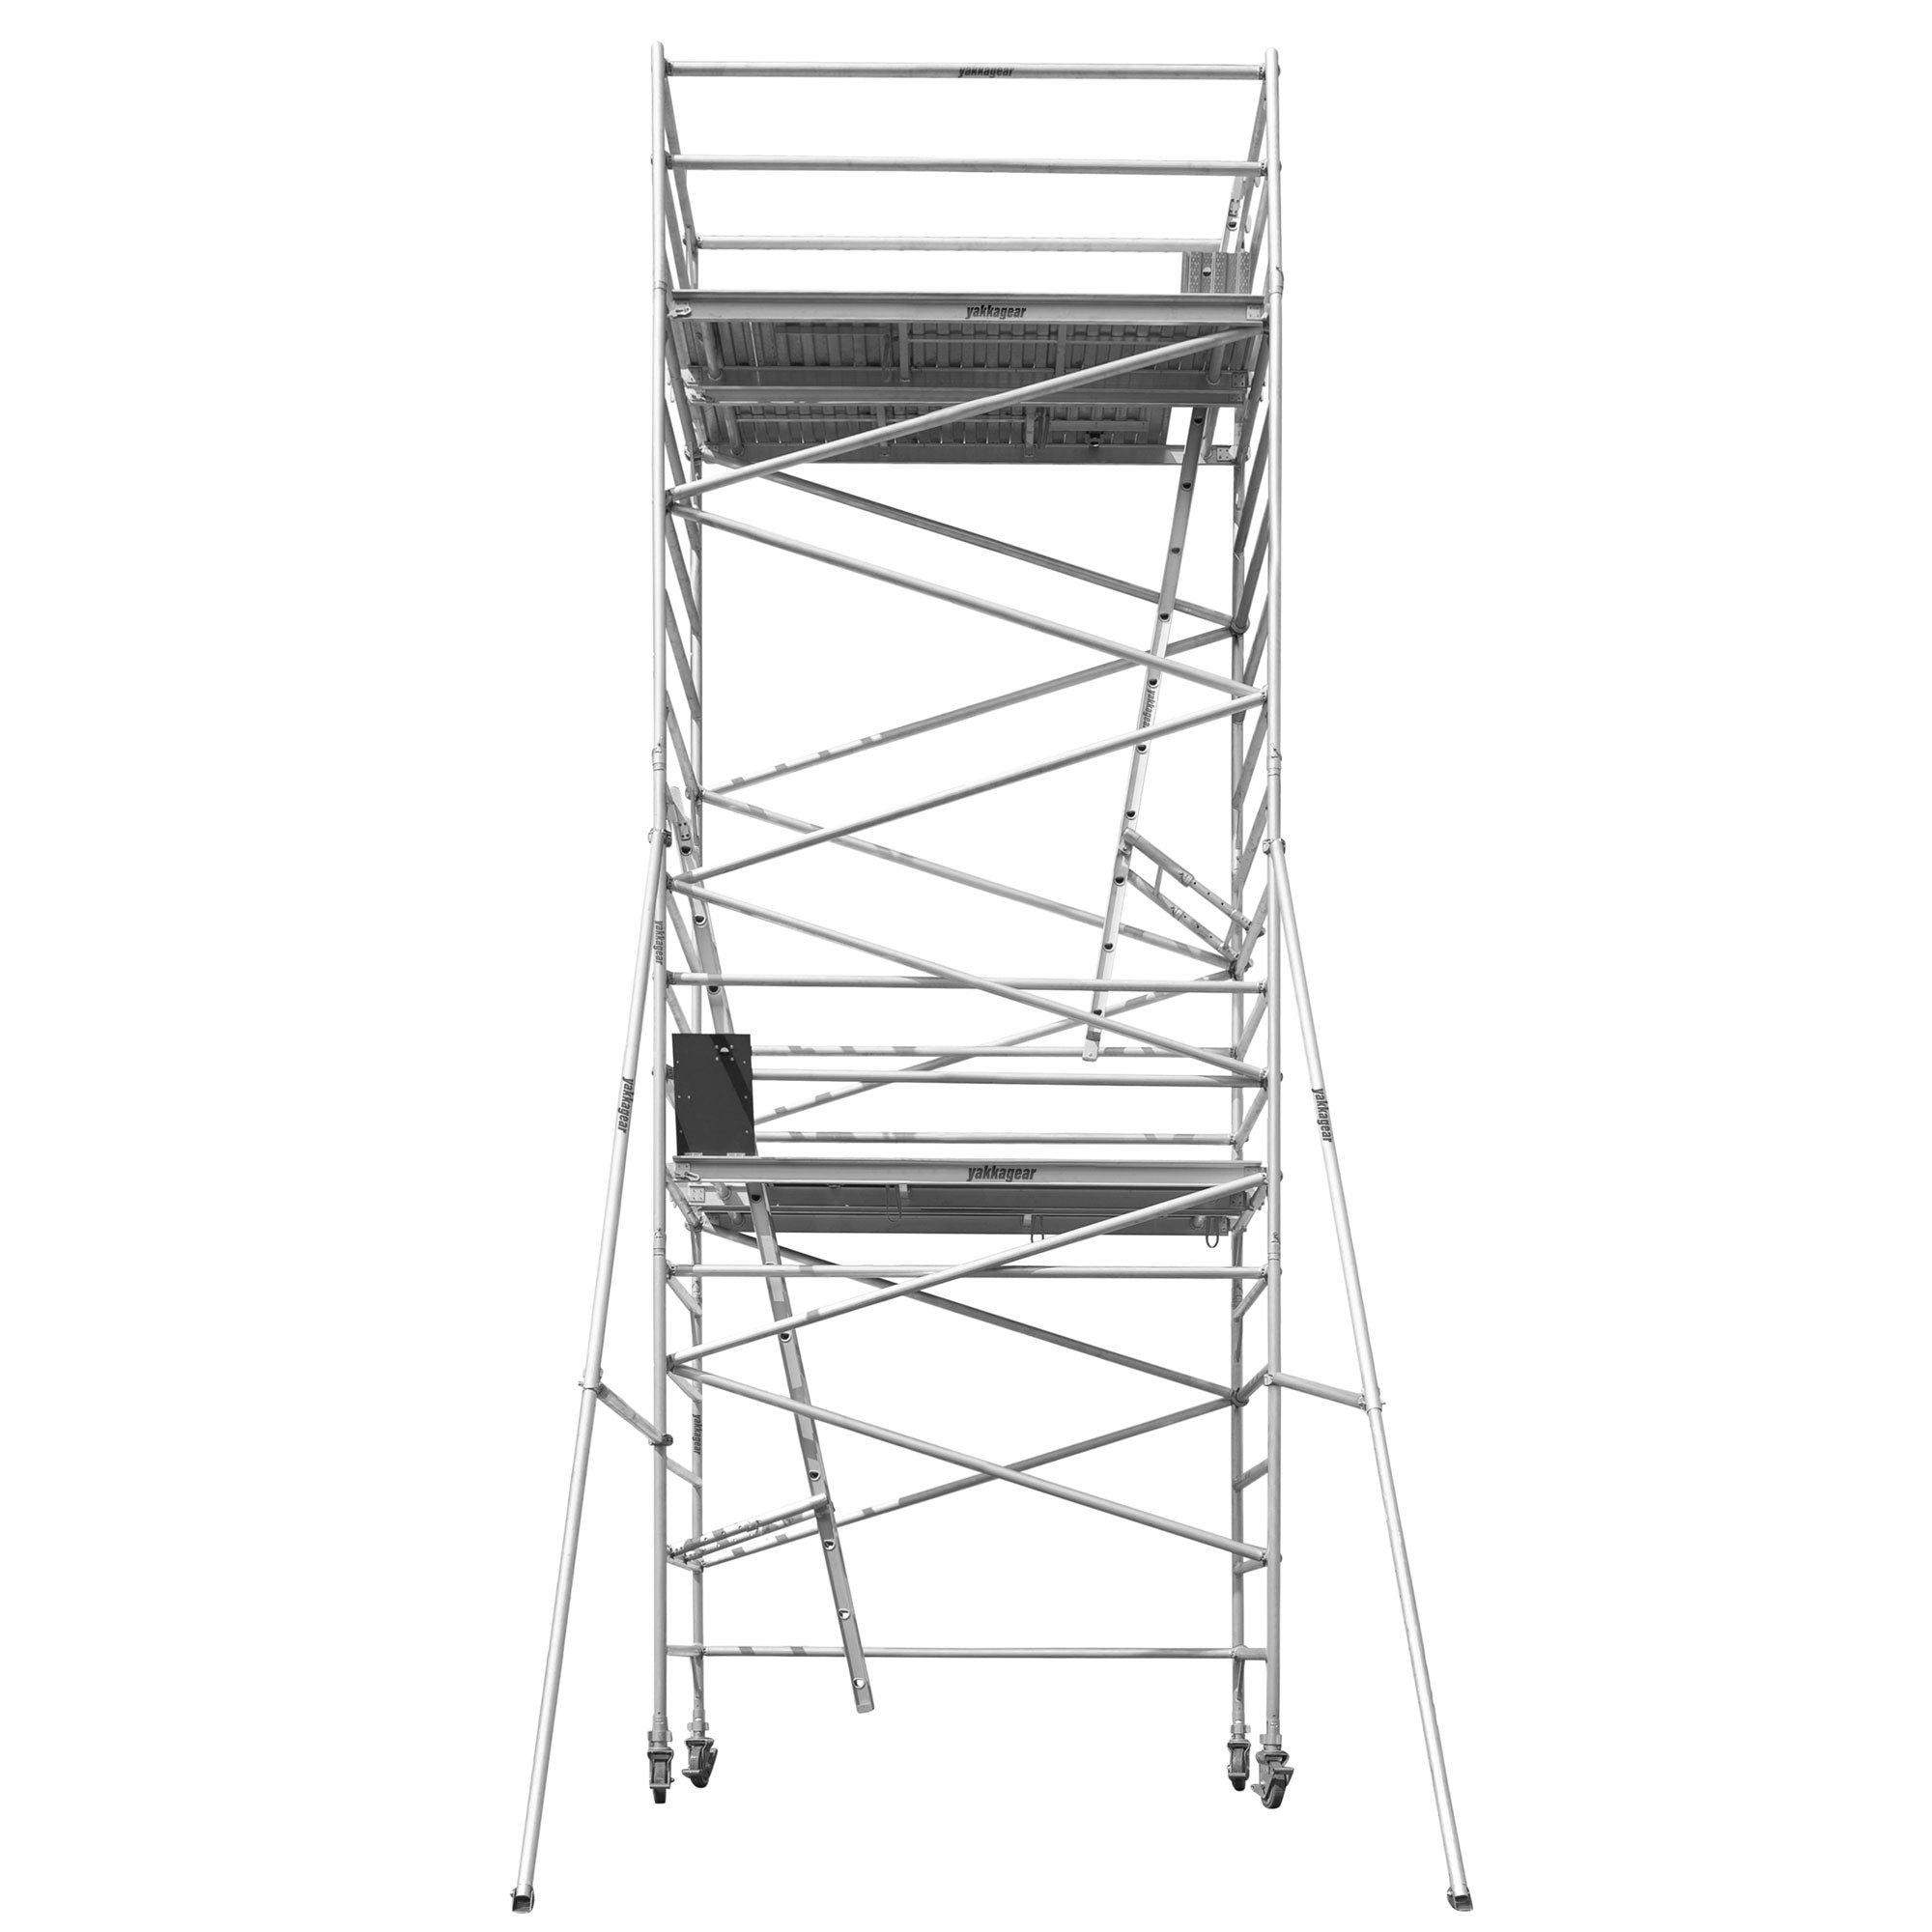 Yakka Gear Australia 2.5m Length 1.3m Wide 8.6m reach wide scaffolding tower access equipment with working height of 6.6m, view from the front angle, white background. 